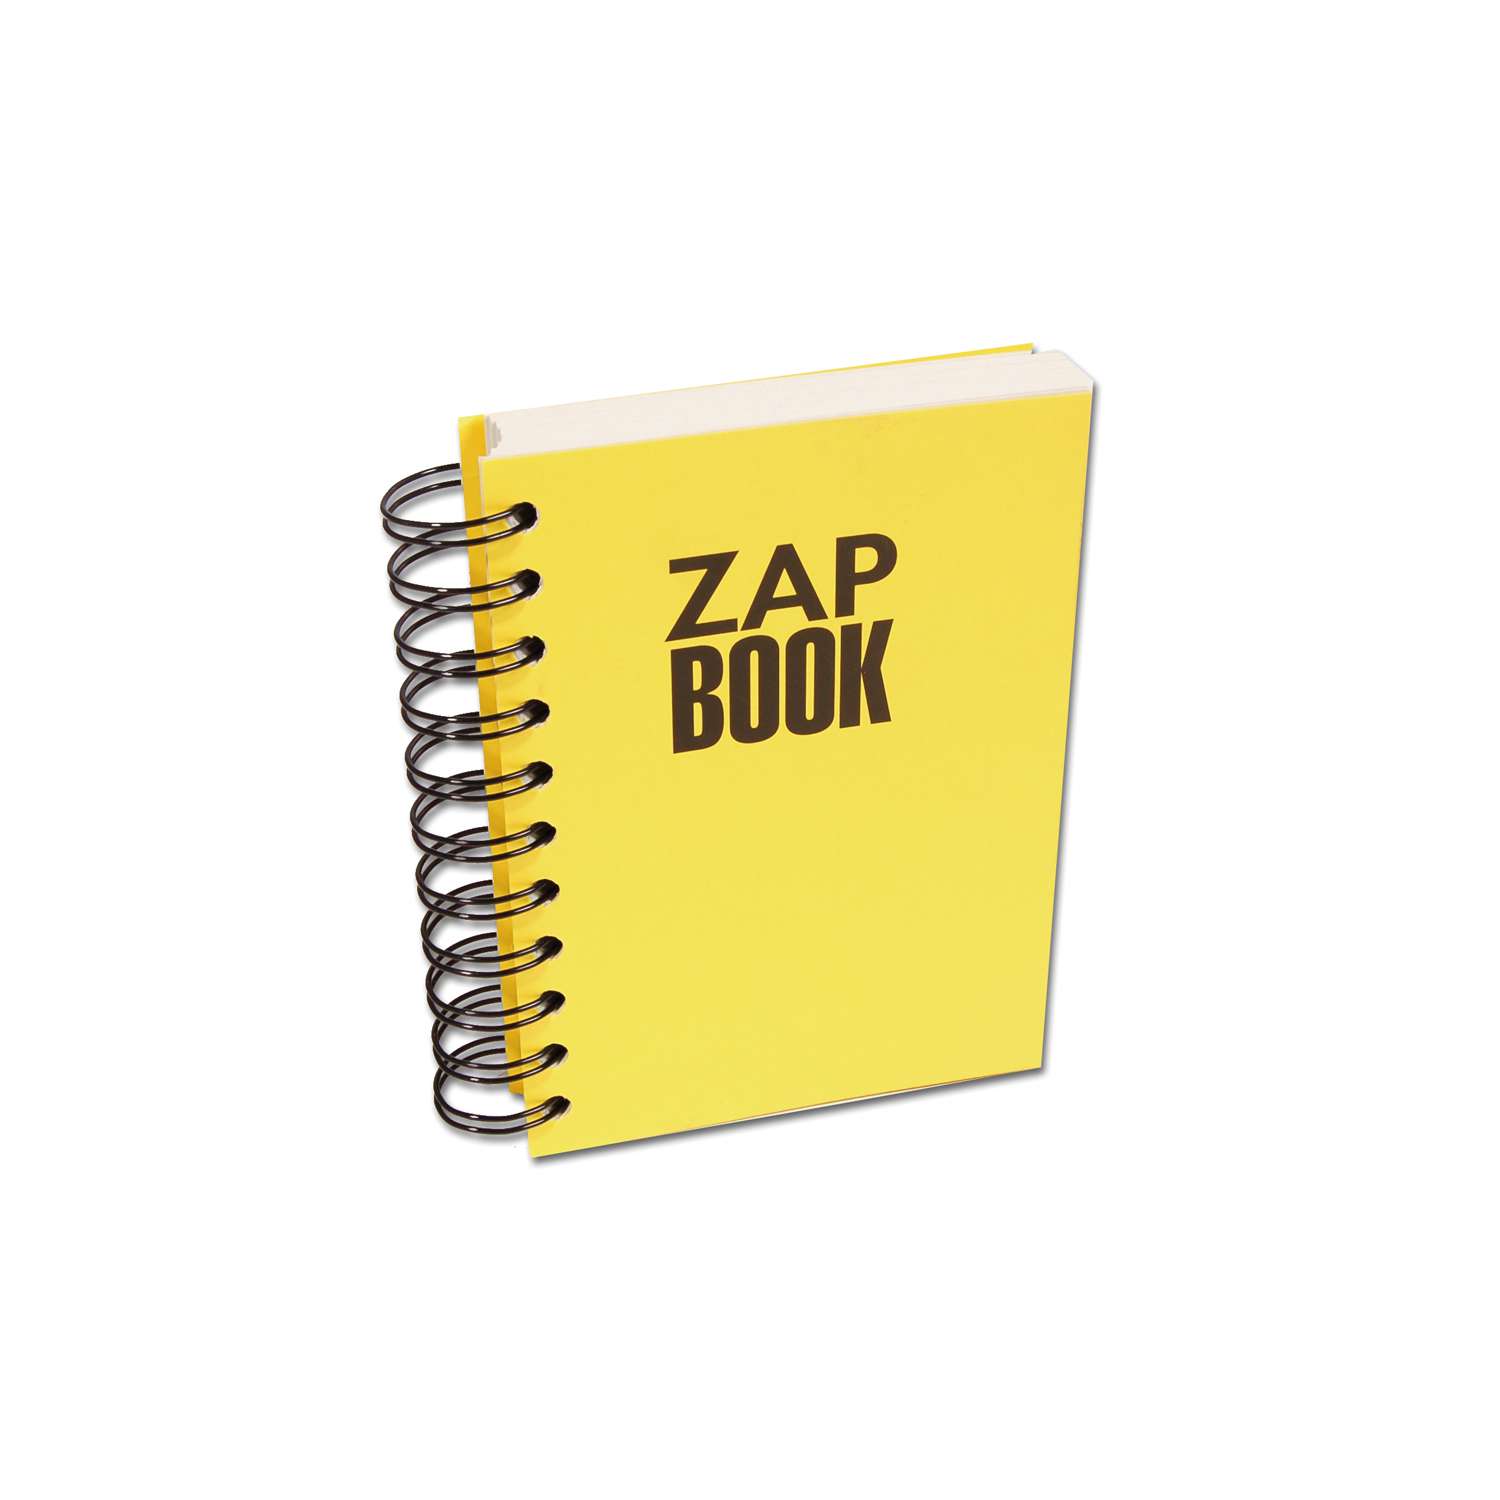 Clairefontaine Zap Book A4 spirale 320 pages 80g - Bloc note - LDLC